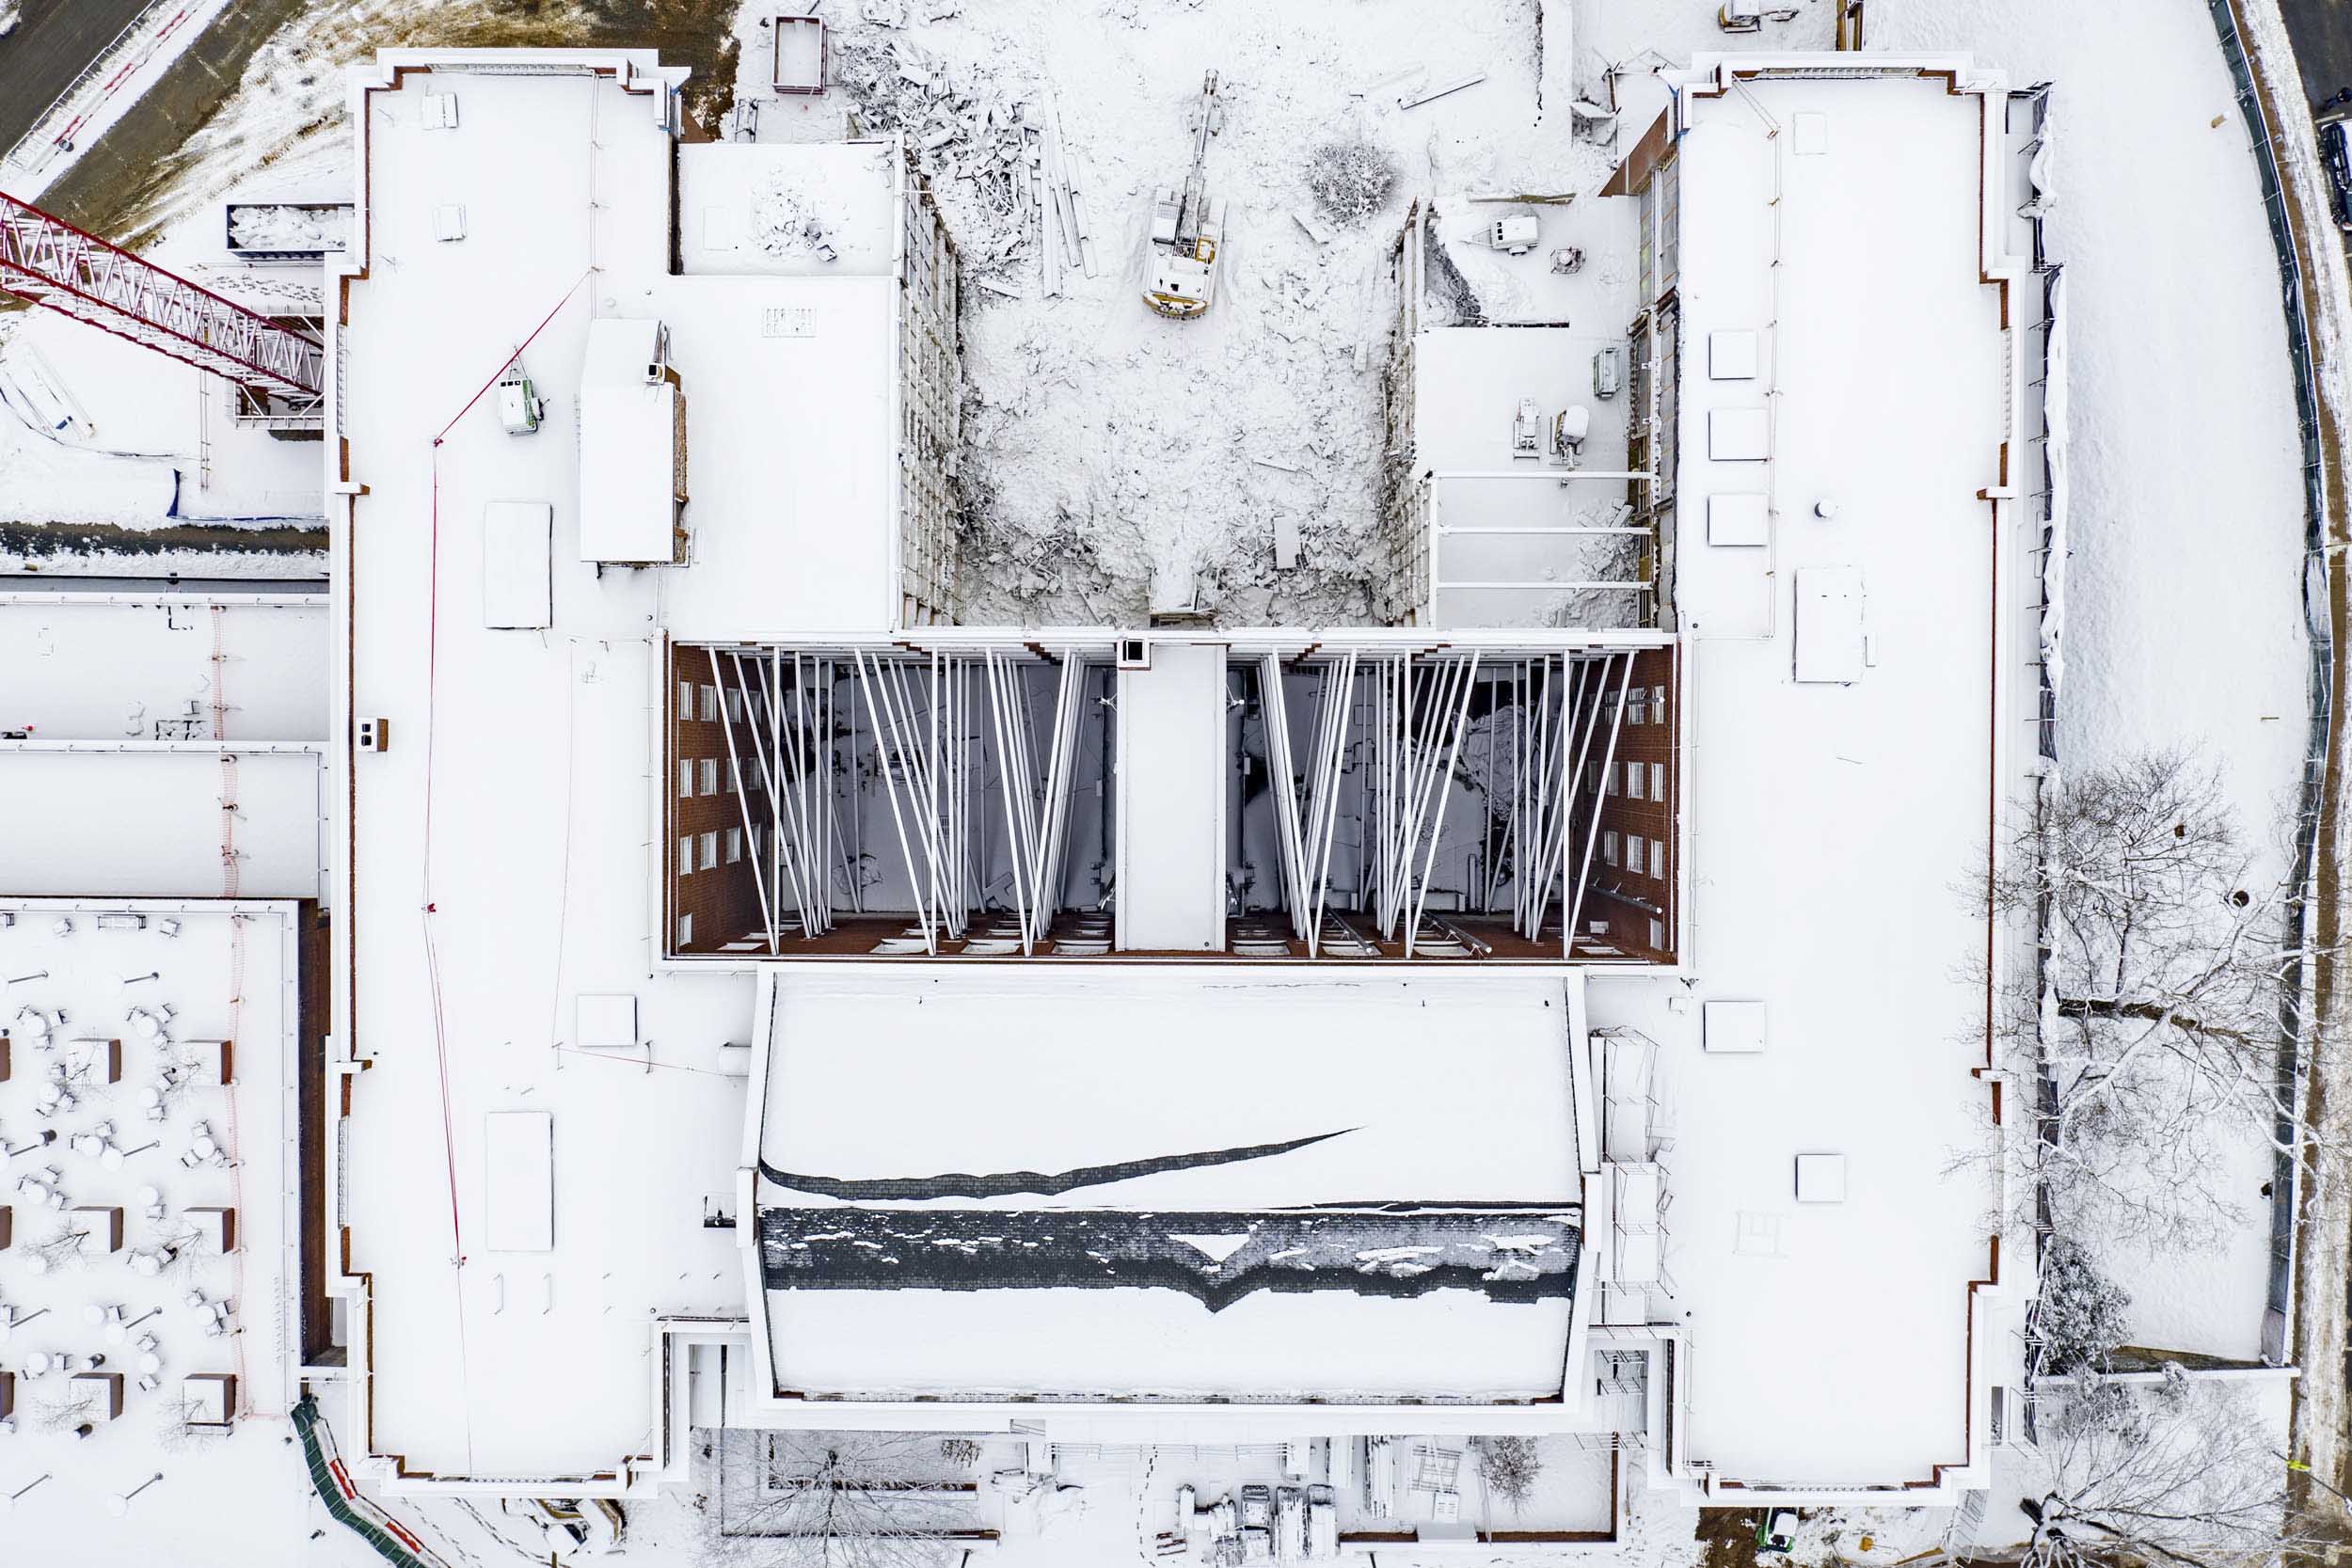 Arial View of a snow covered Alderman construction zone